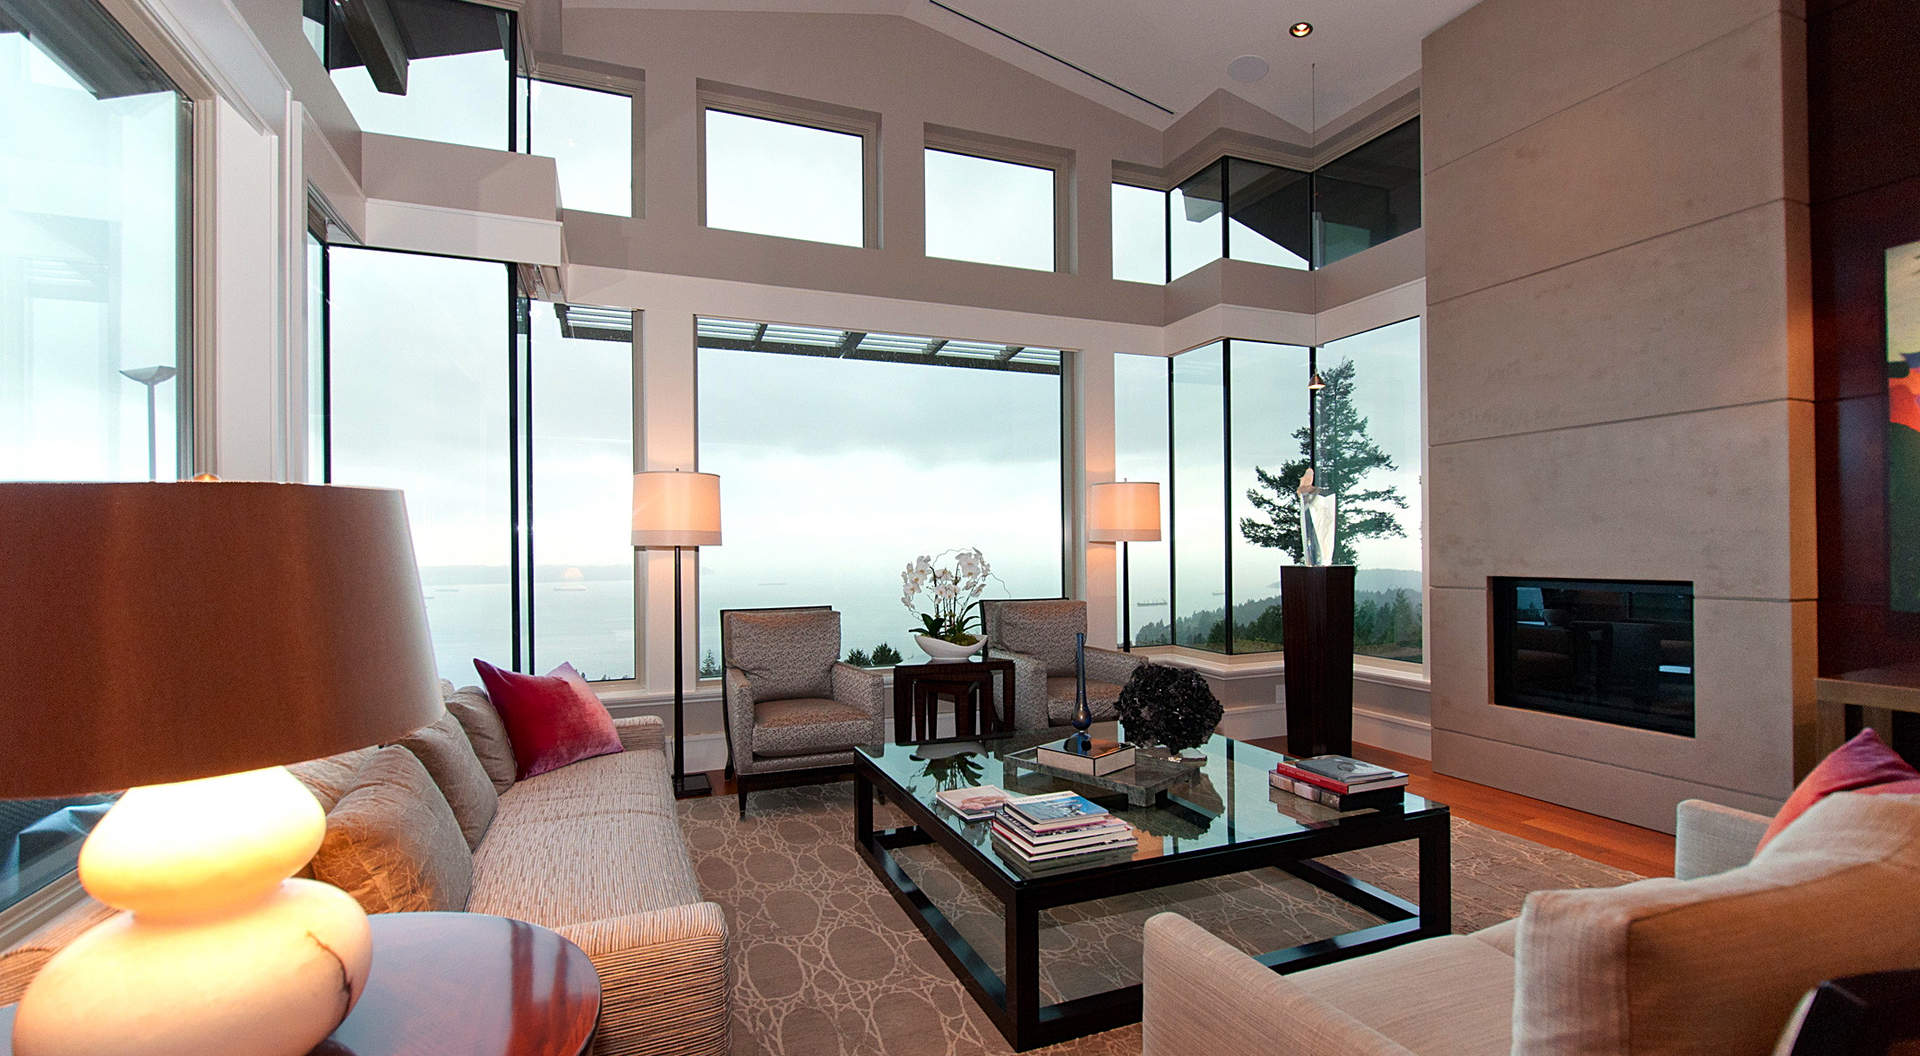 exciting-open-living-room-in-west-coast-penthouse-with-fancy-drum-lamp-shade-and-terrific-glass-coffee-table-and-sophisticated-sea-view-from-large-glass-windows